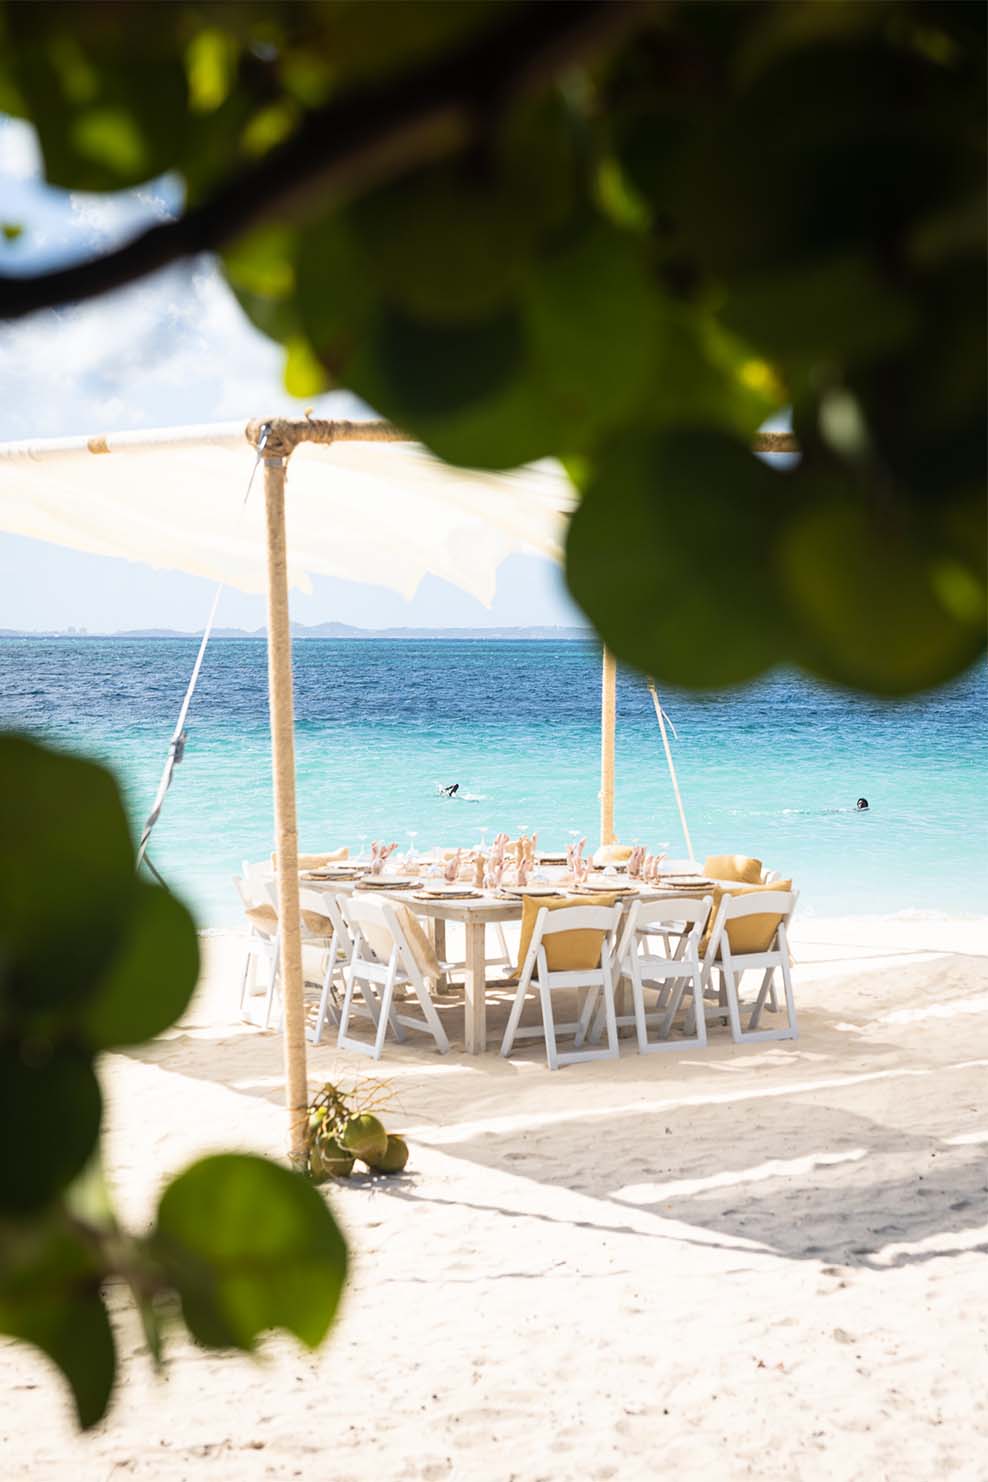 ANI Anguilla - Guest Privileges - Beach BBQ - Set Up from the trees